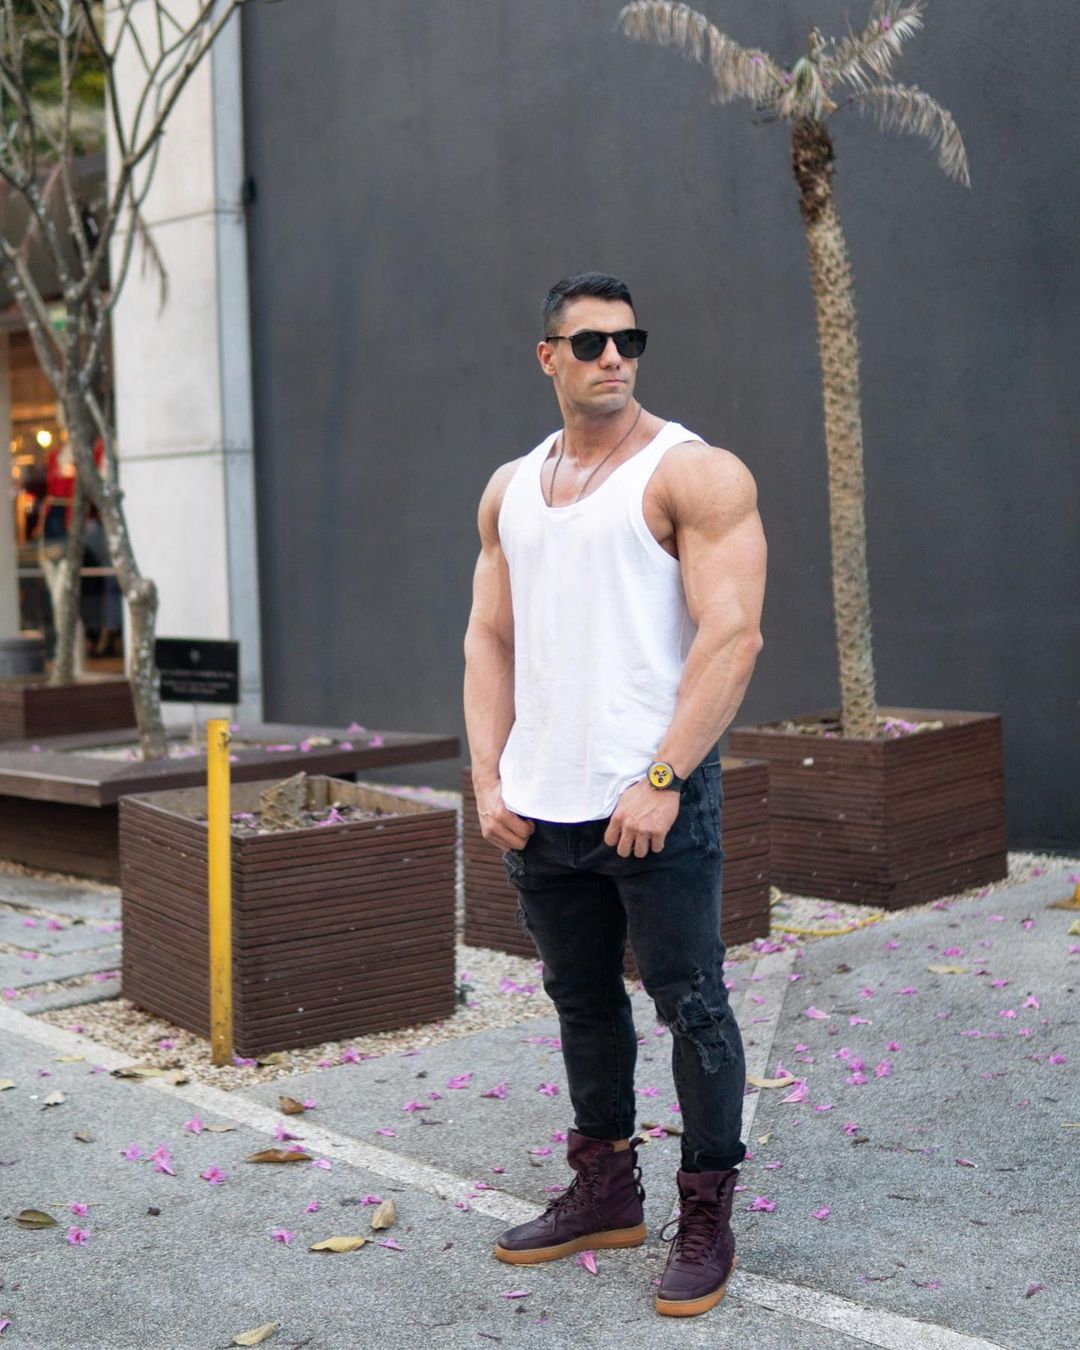 huge-strong-hot-man-sunglasses-matheus-pagan-muscle-arms-masculine-daddy